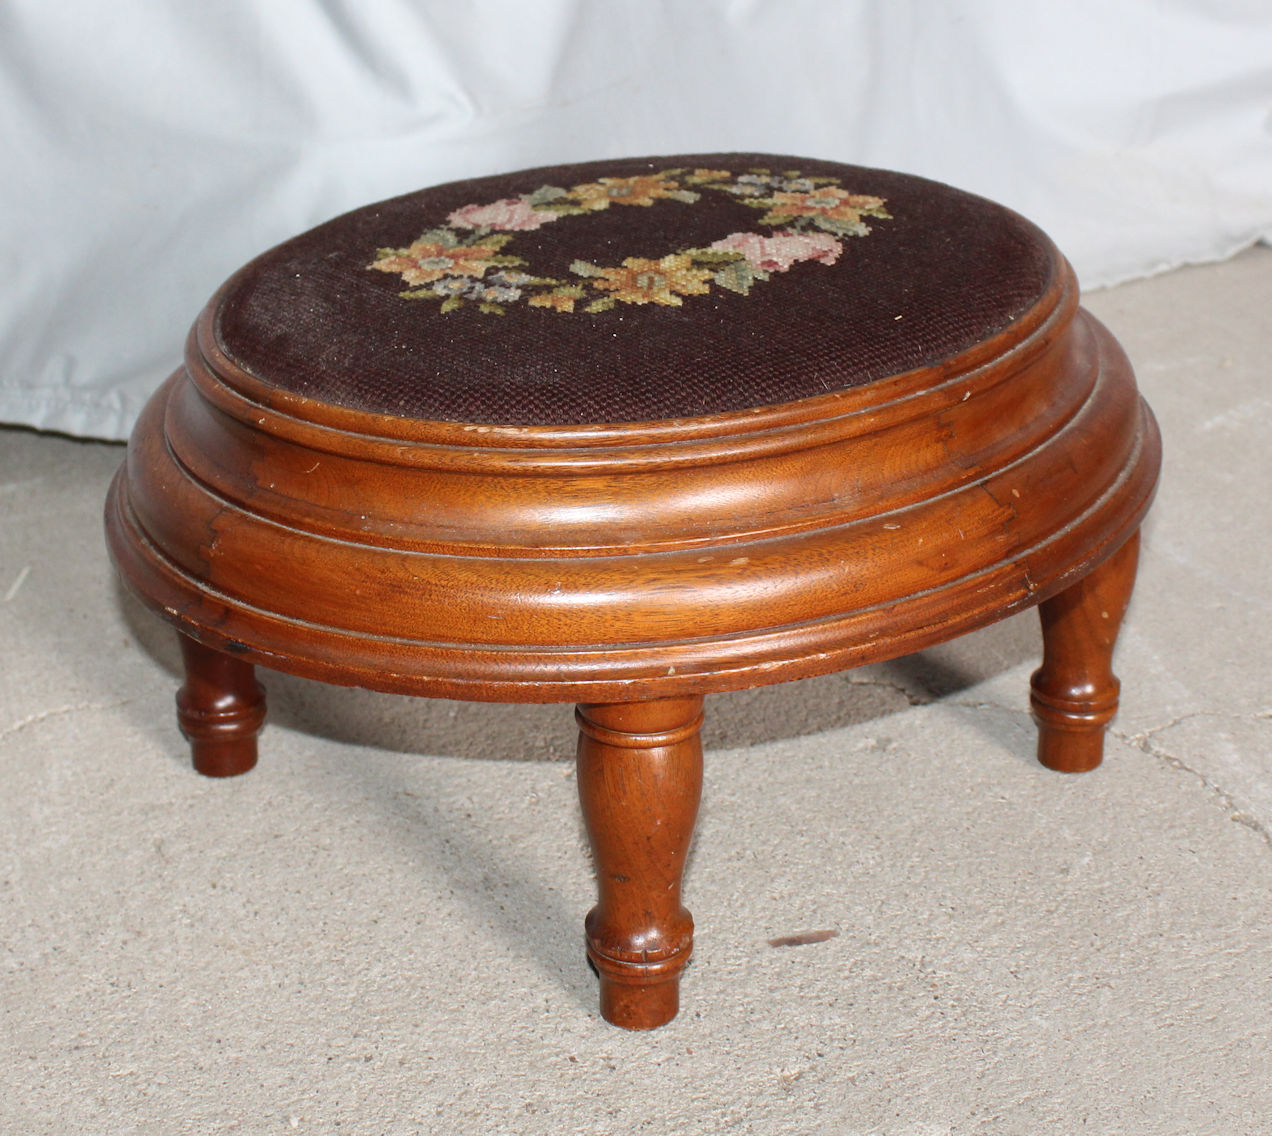 Needle point stool : r/Antiques